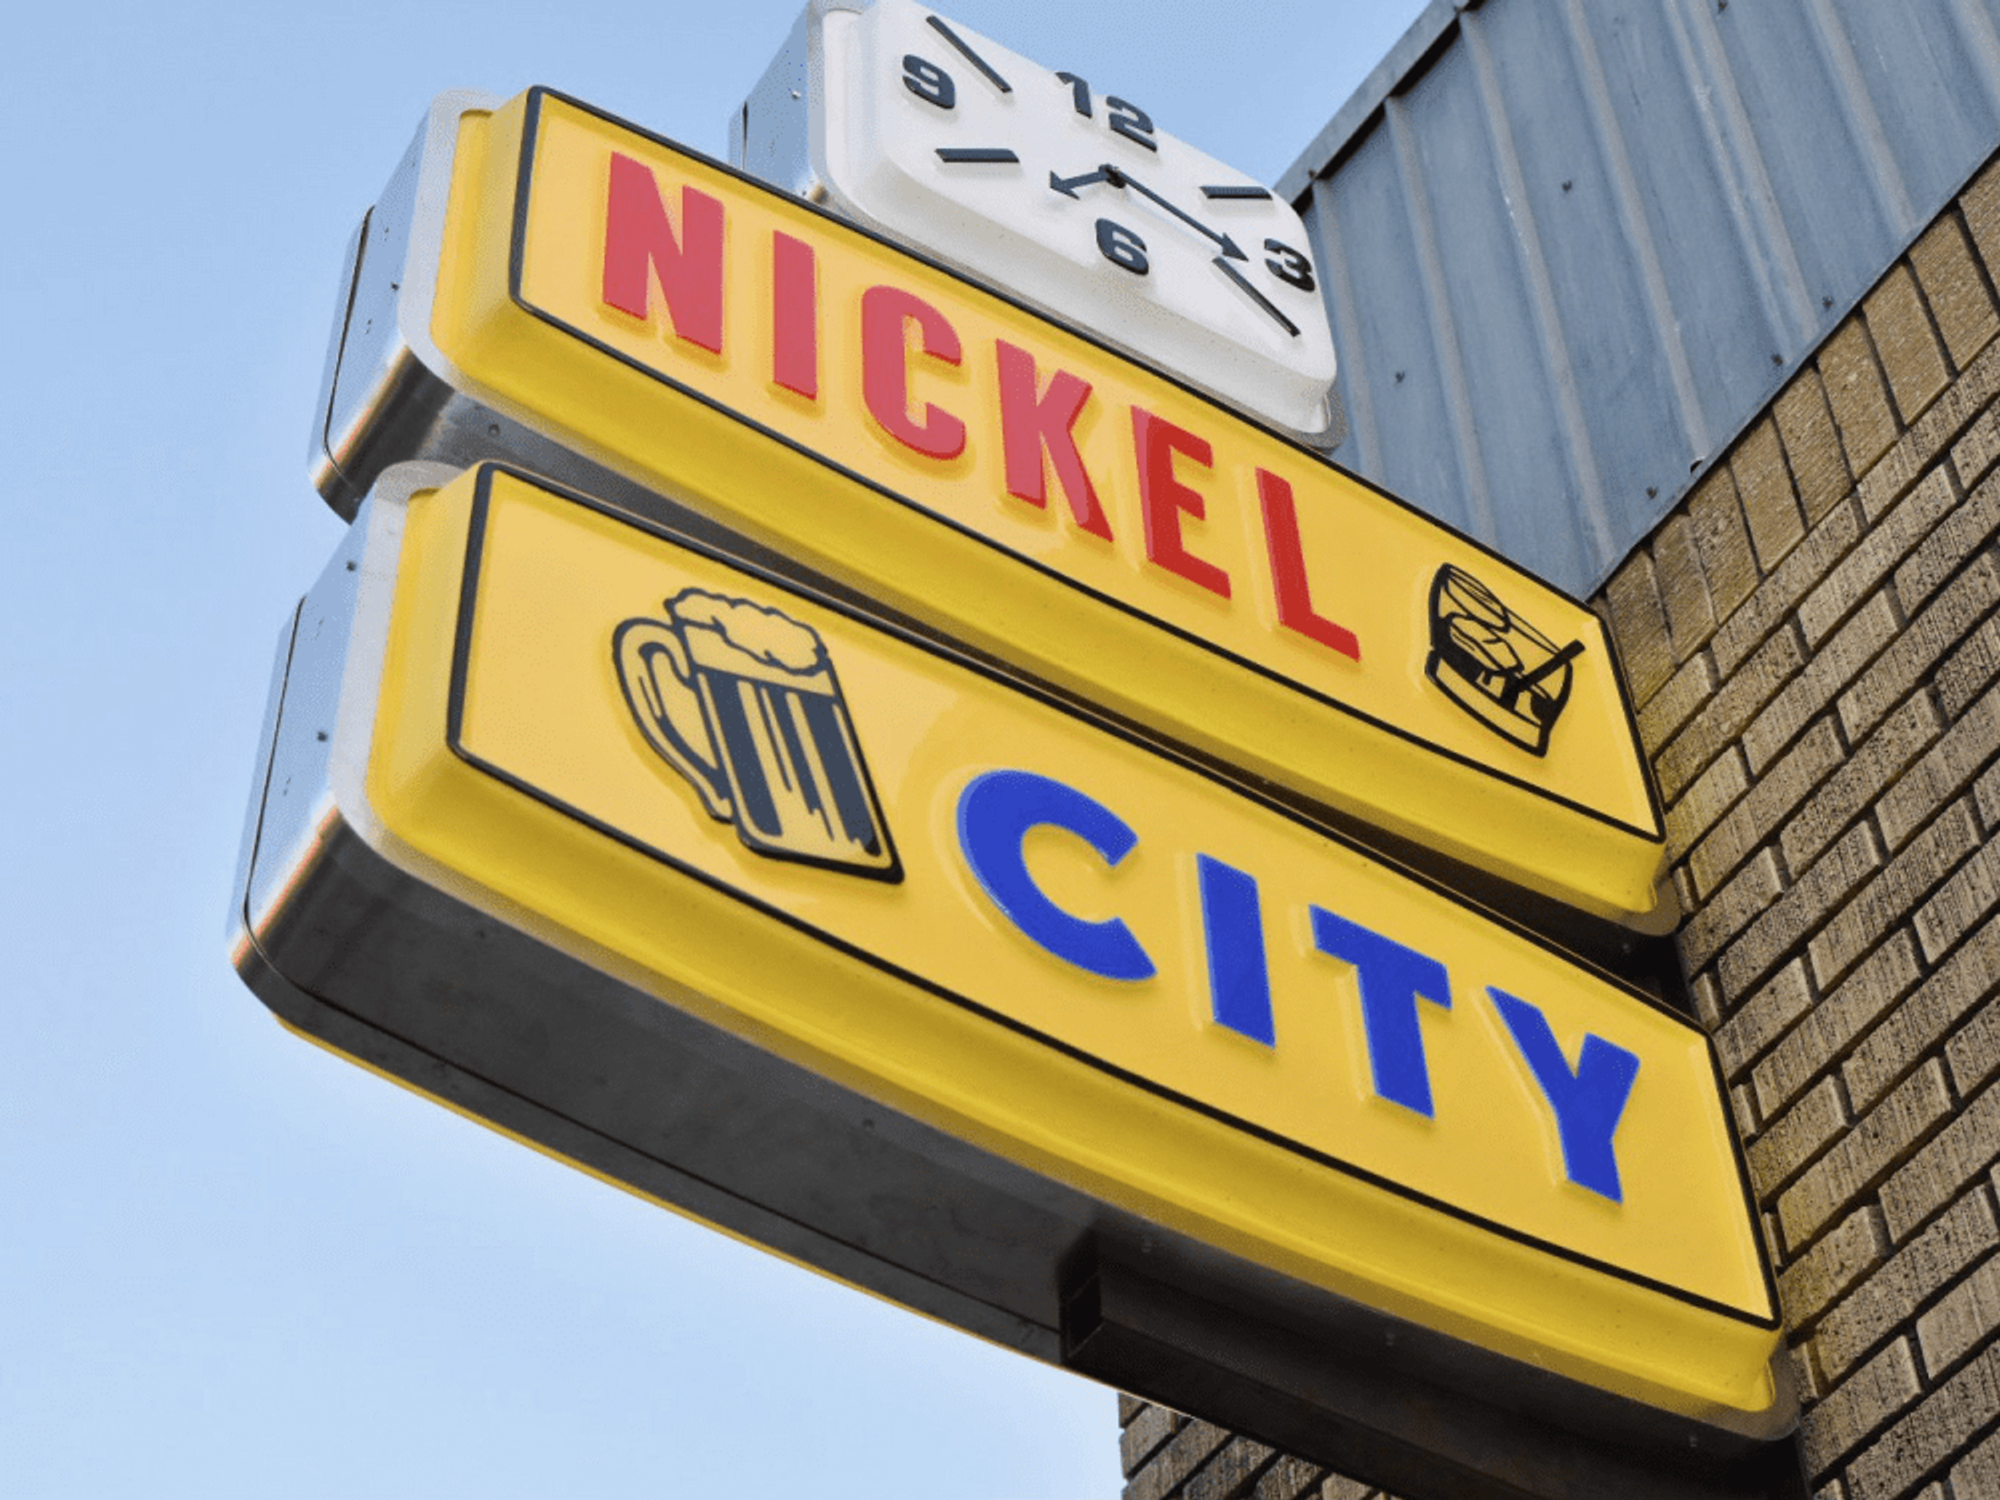 Nickel City is the new anytime bar in the former Longbranch Inn space.